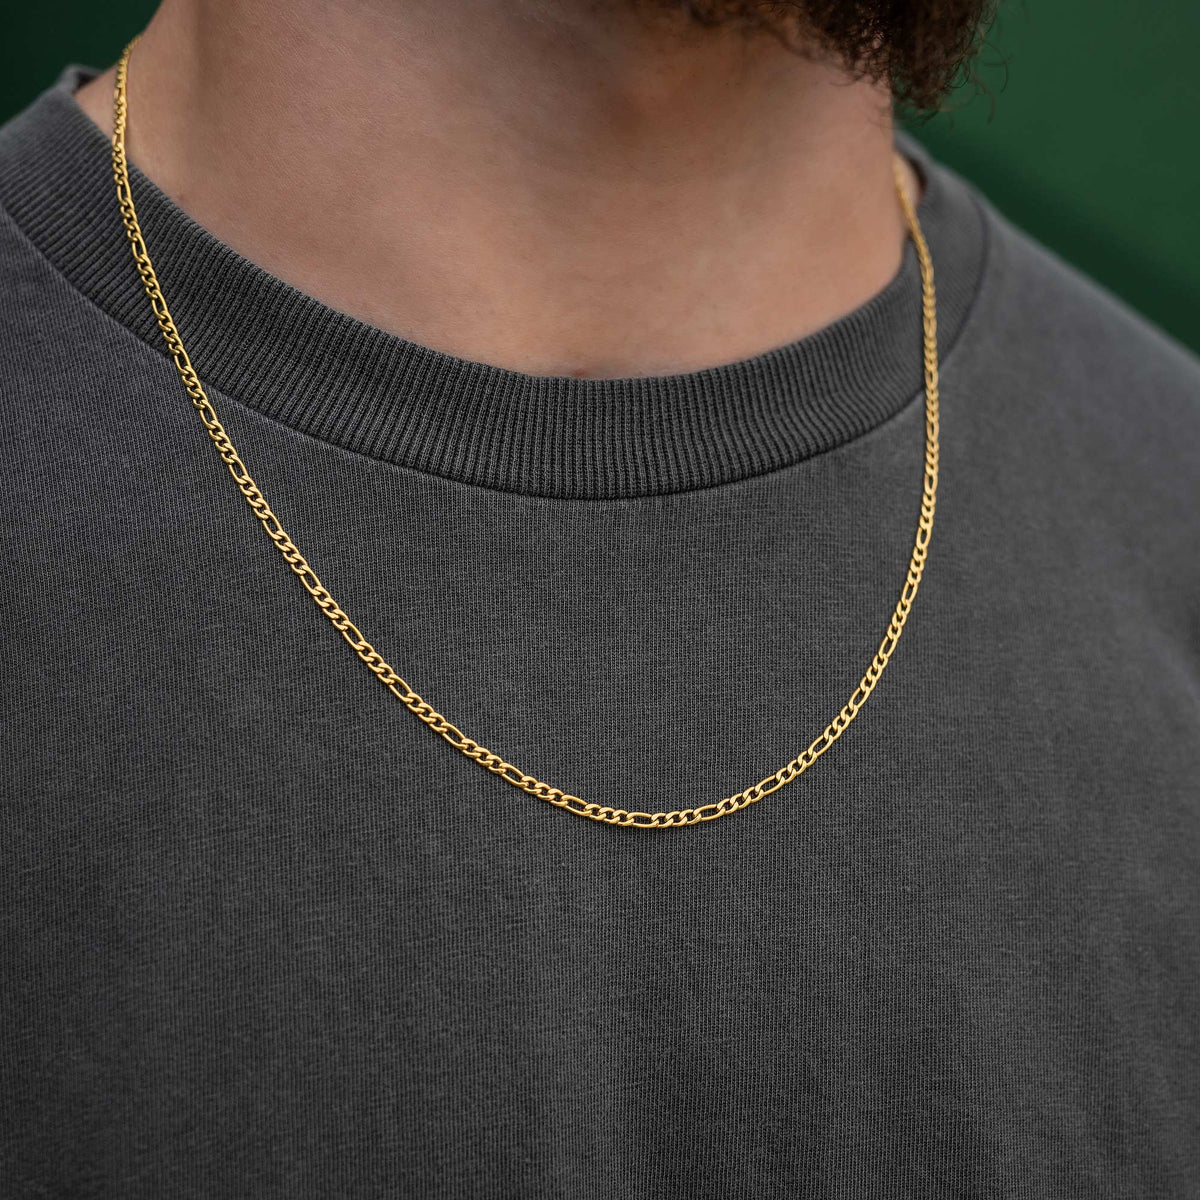 Mens figaro link necklace in gold on body 